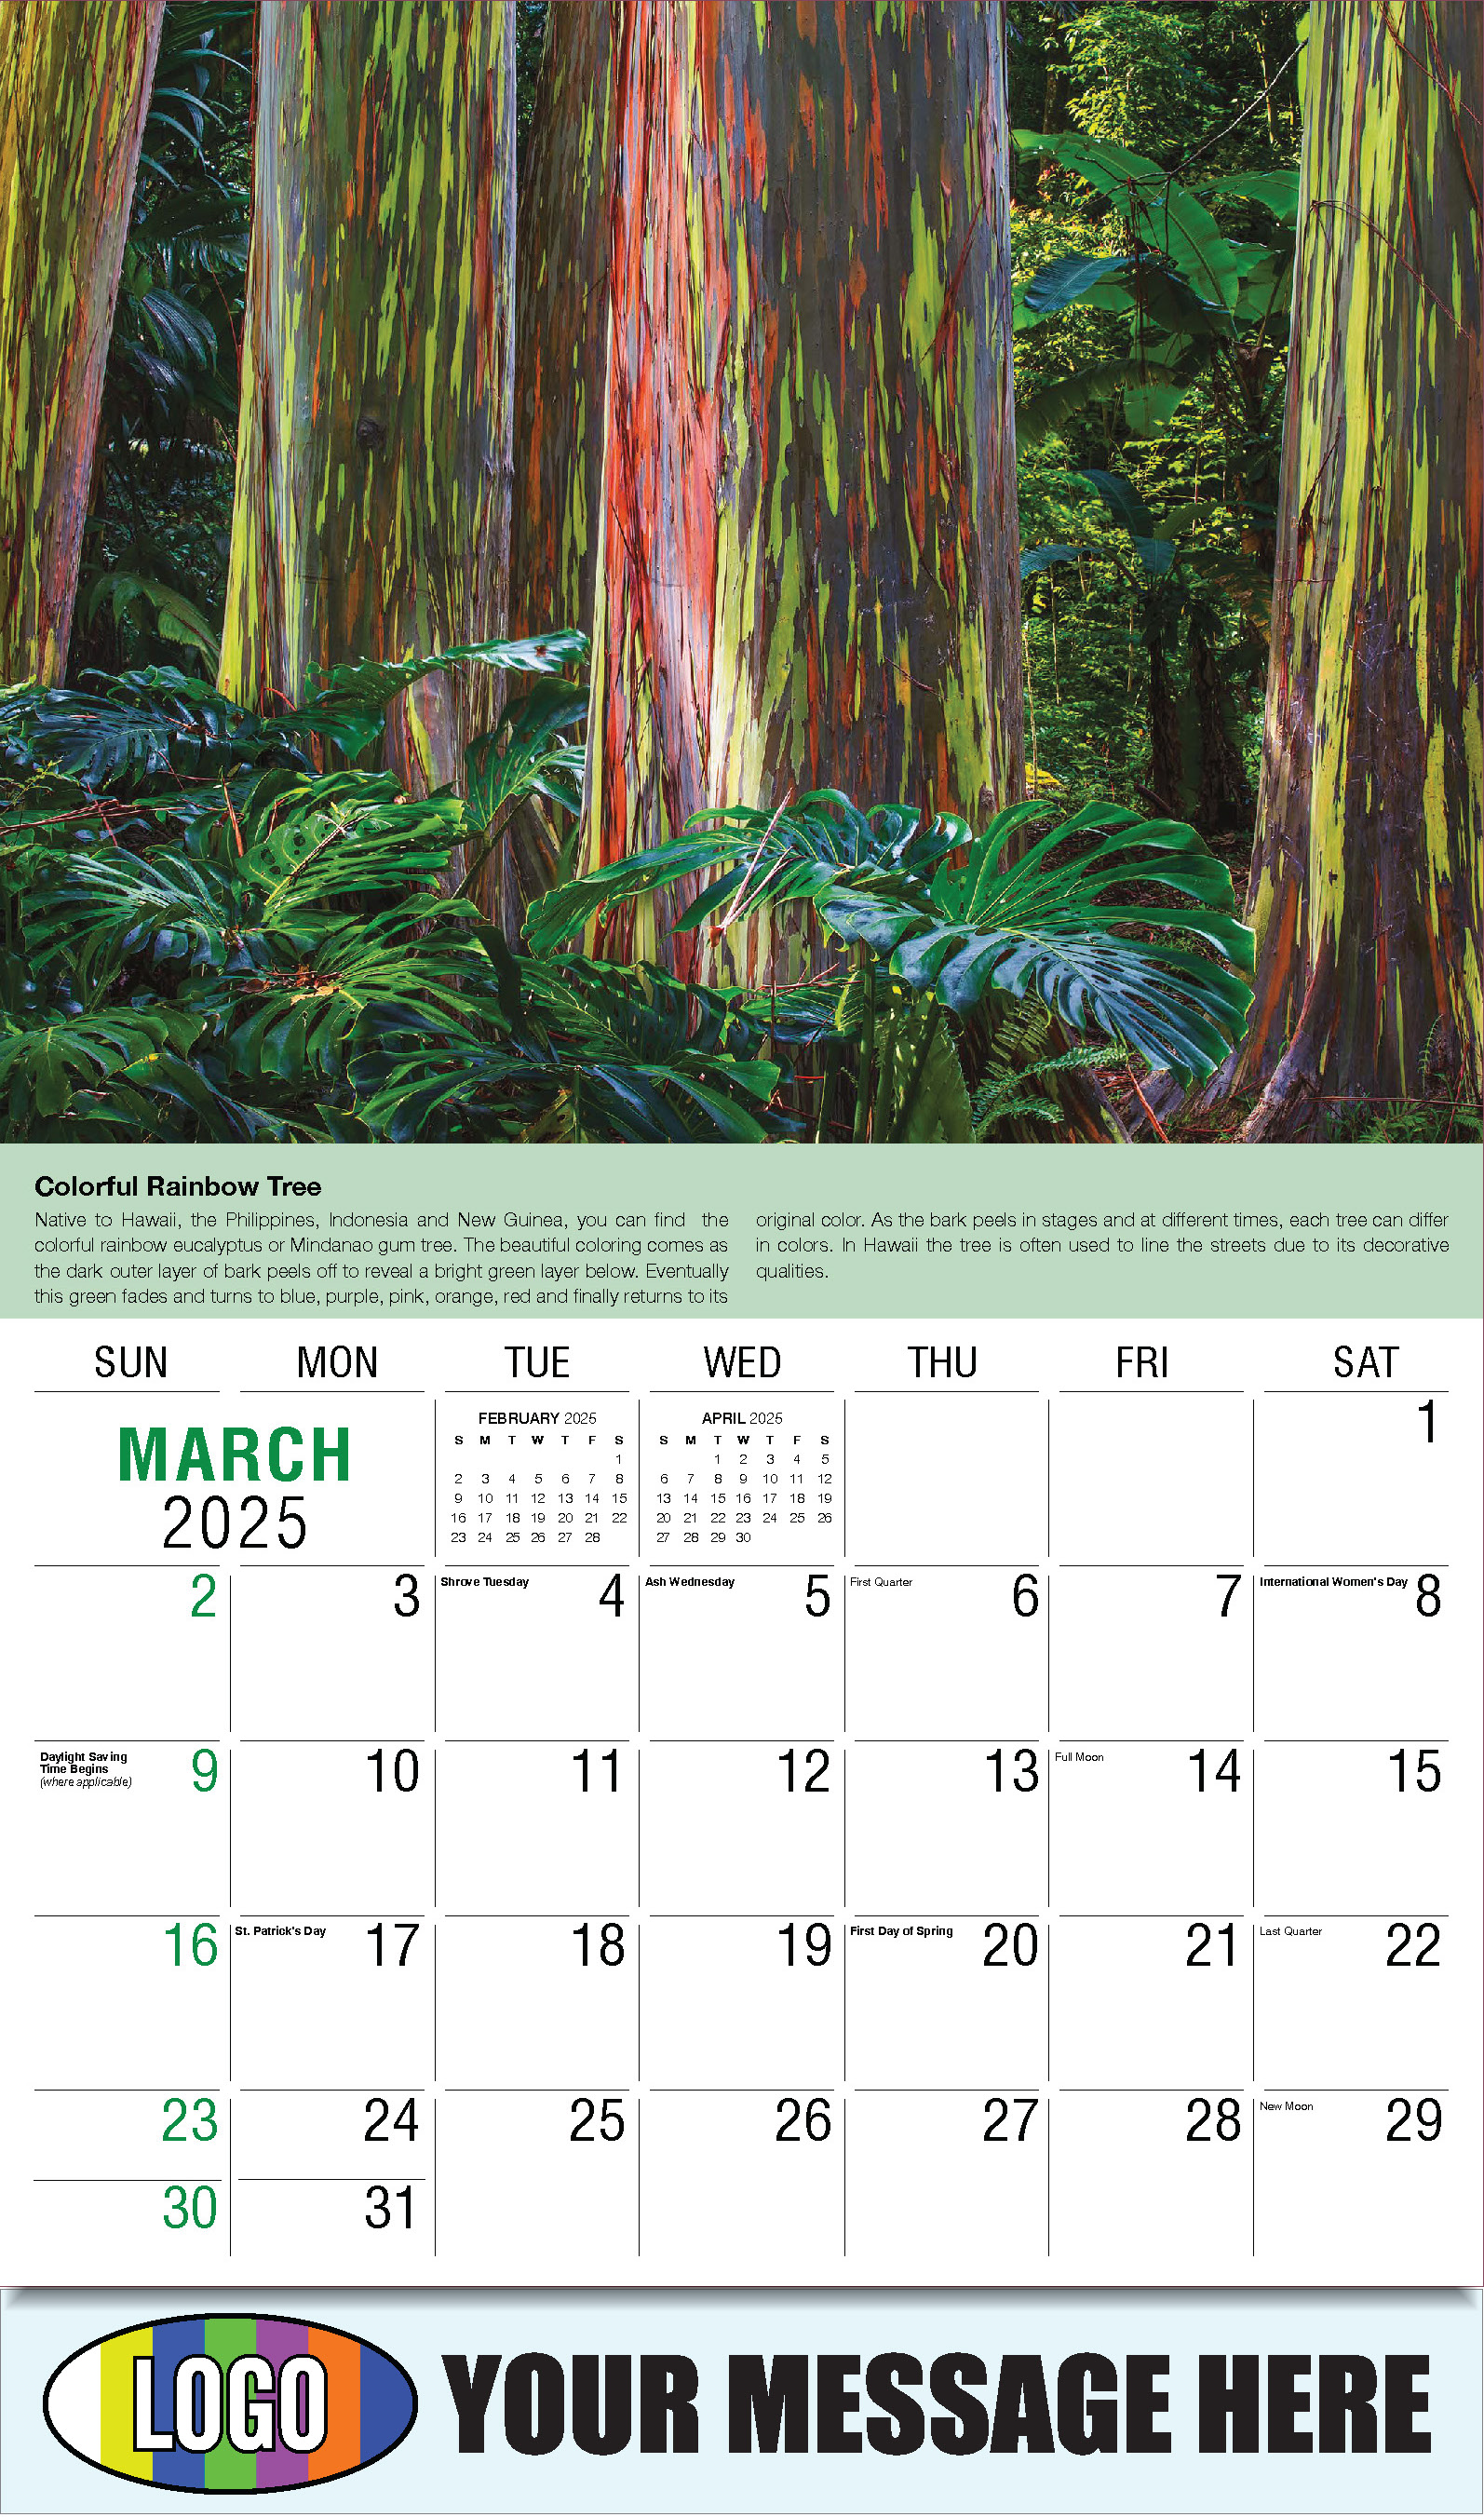 Planet Earth 2025 Business Promotional Wall Calendar - March